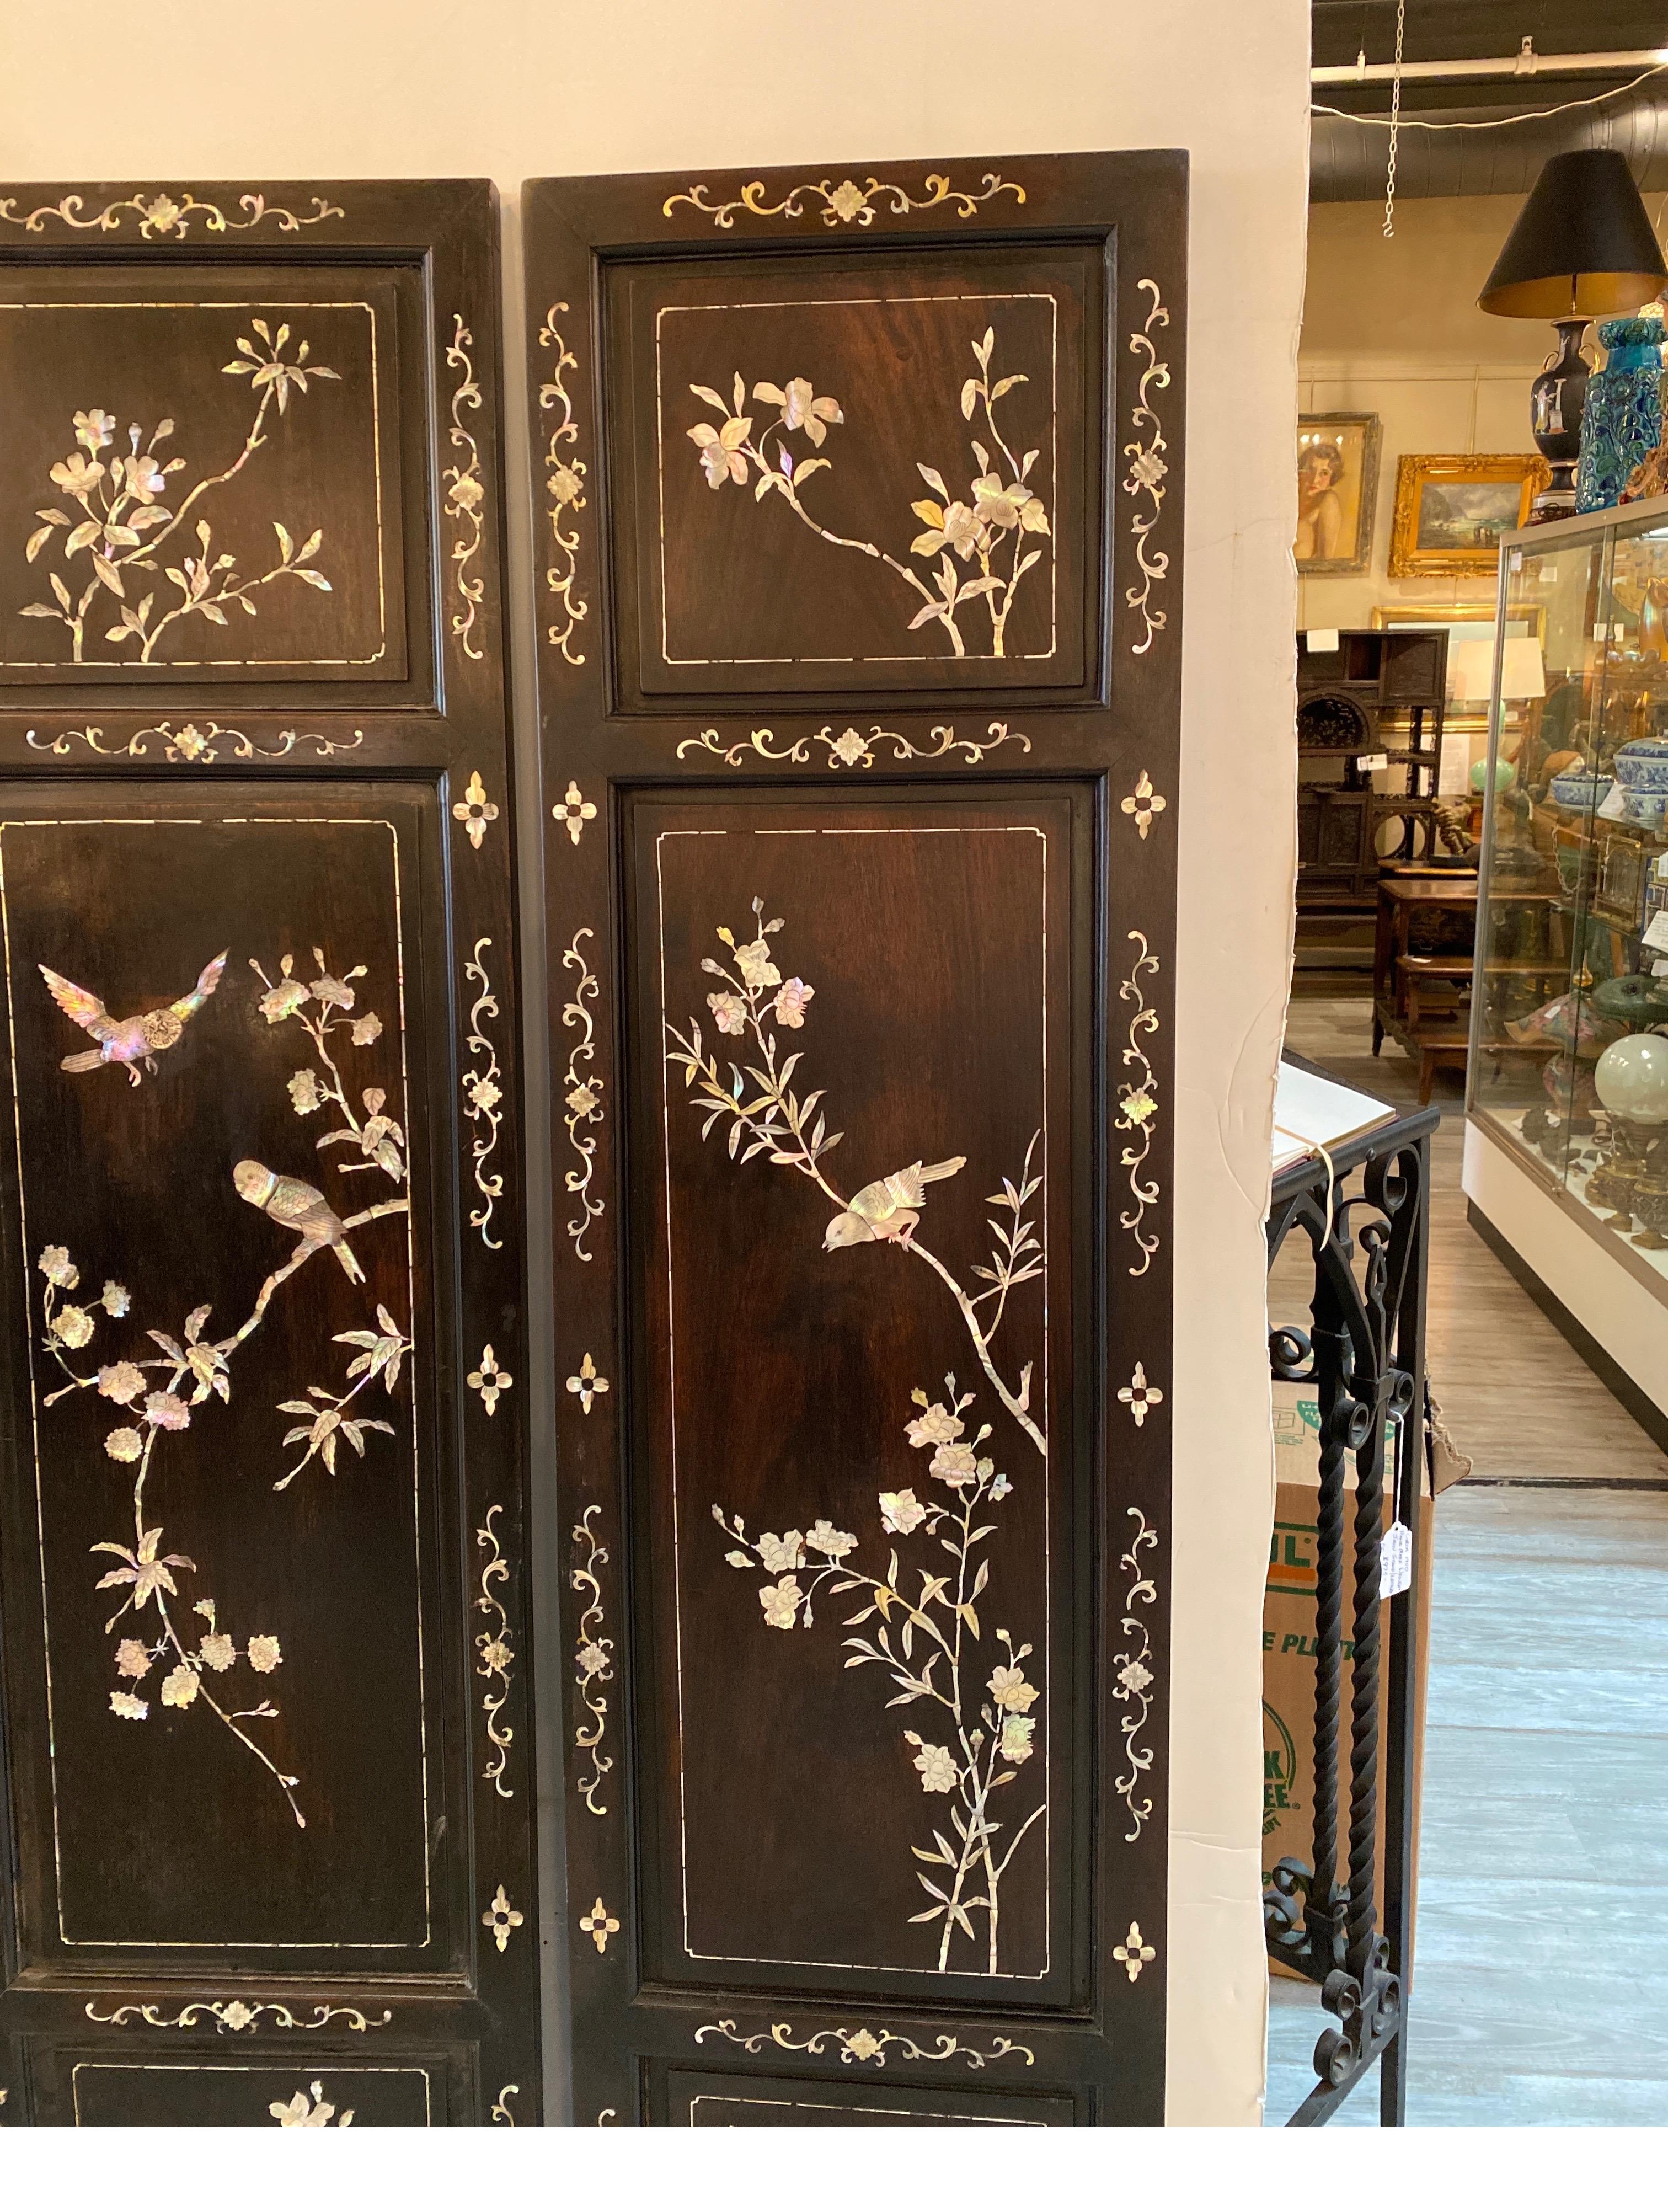 A set of four antique Chinese decorative panes with mother of pear inlay. The panels with floral and branch with various birds hand inlaid into a hardwood panel. The four panels may have been a folding screen but are smoothly finished all along the